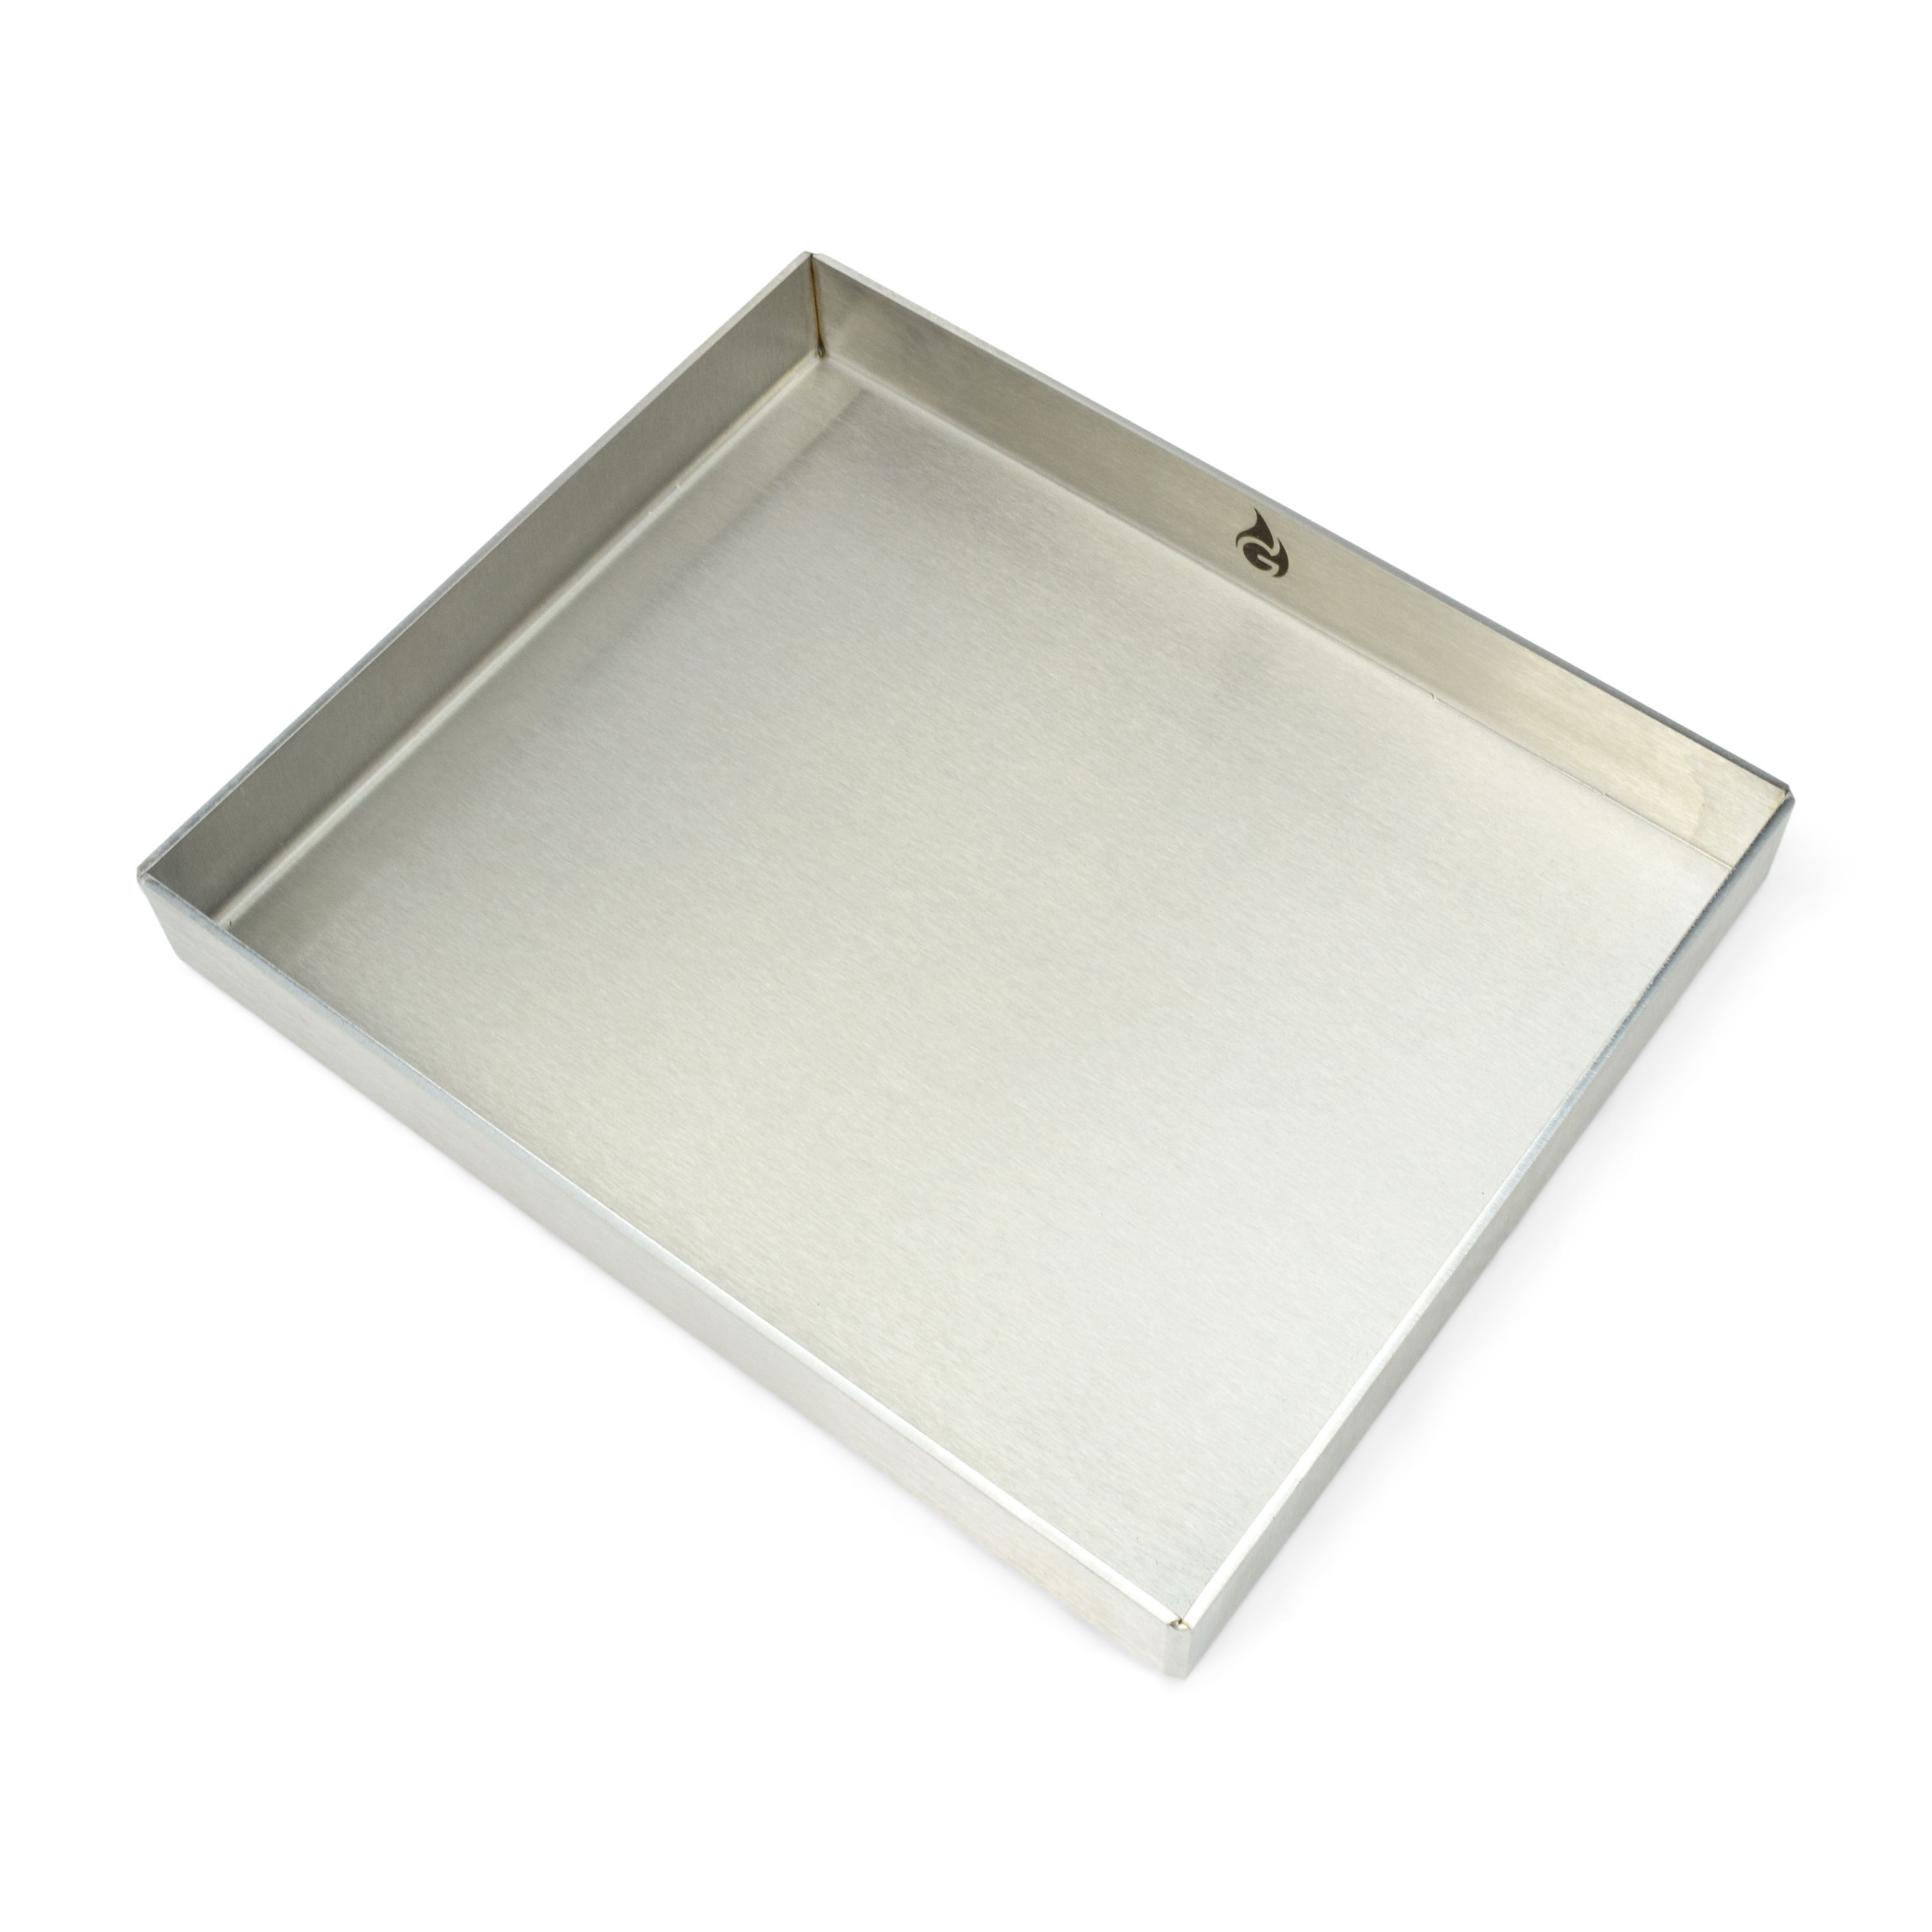 Stainless Steel Grill Plate - Plancha 30 x 25cm Closed grill tray - tightly welded